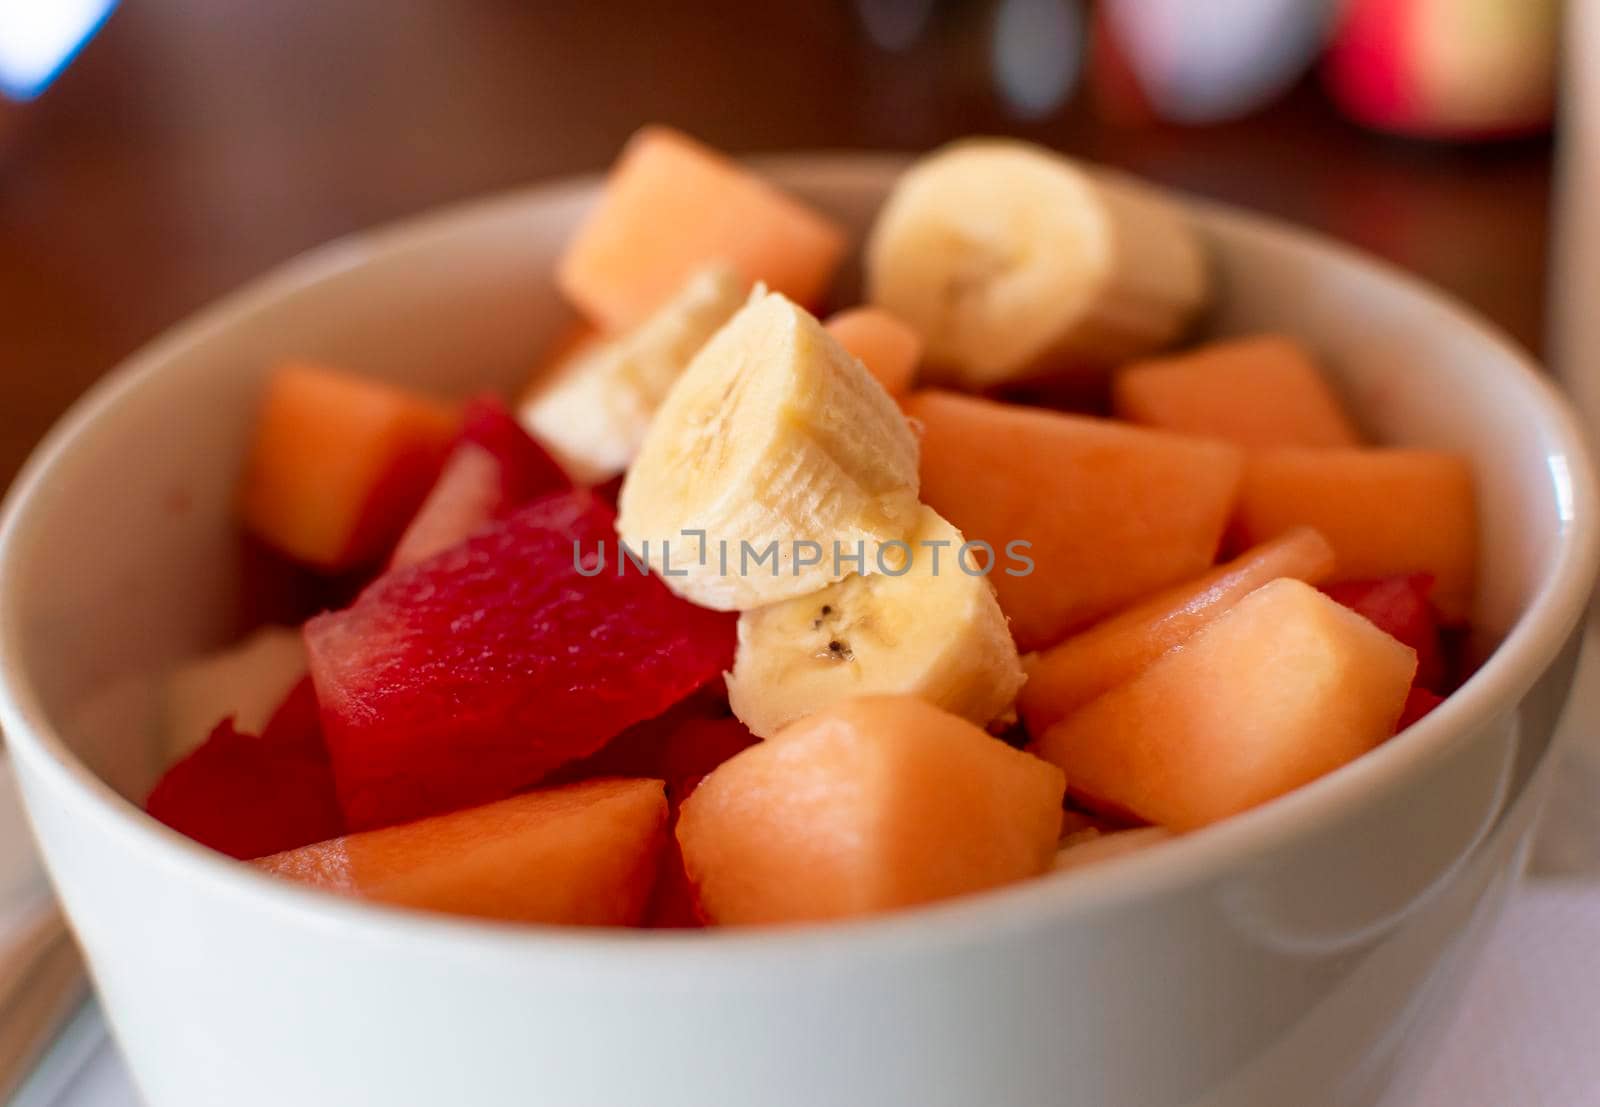 Close up of a cup of banana fruit salad with watermelon, Close up of fruit salad of banana, watermelon and melon